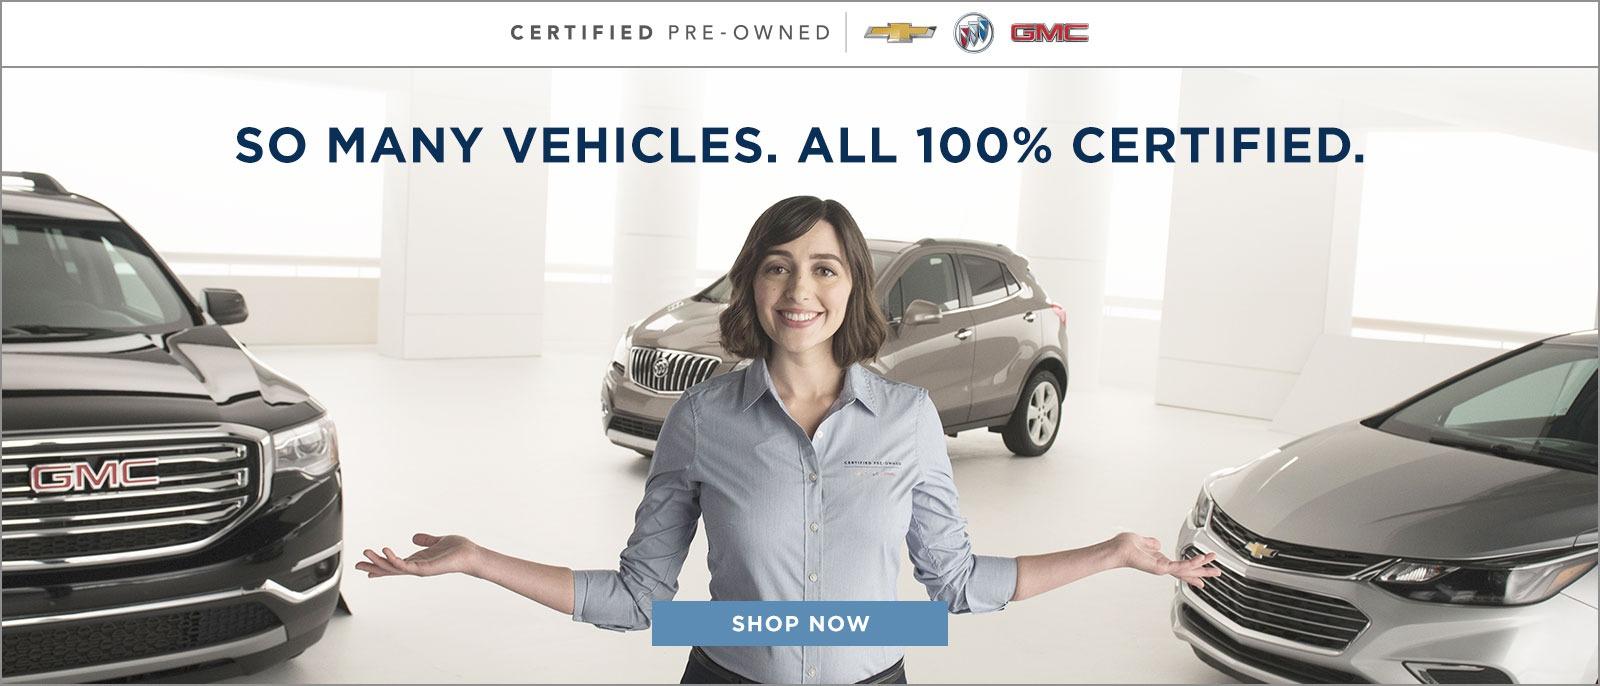 Certified pre-owned | So many vehicles. All 100% Certified